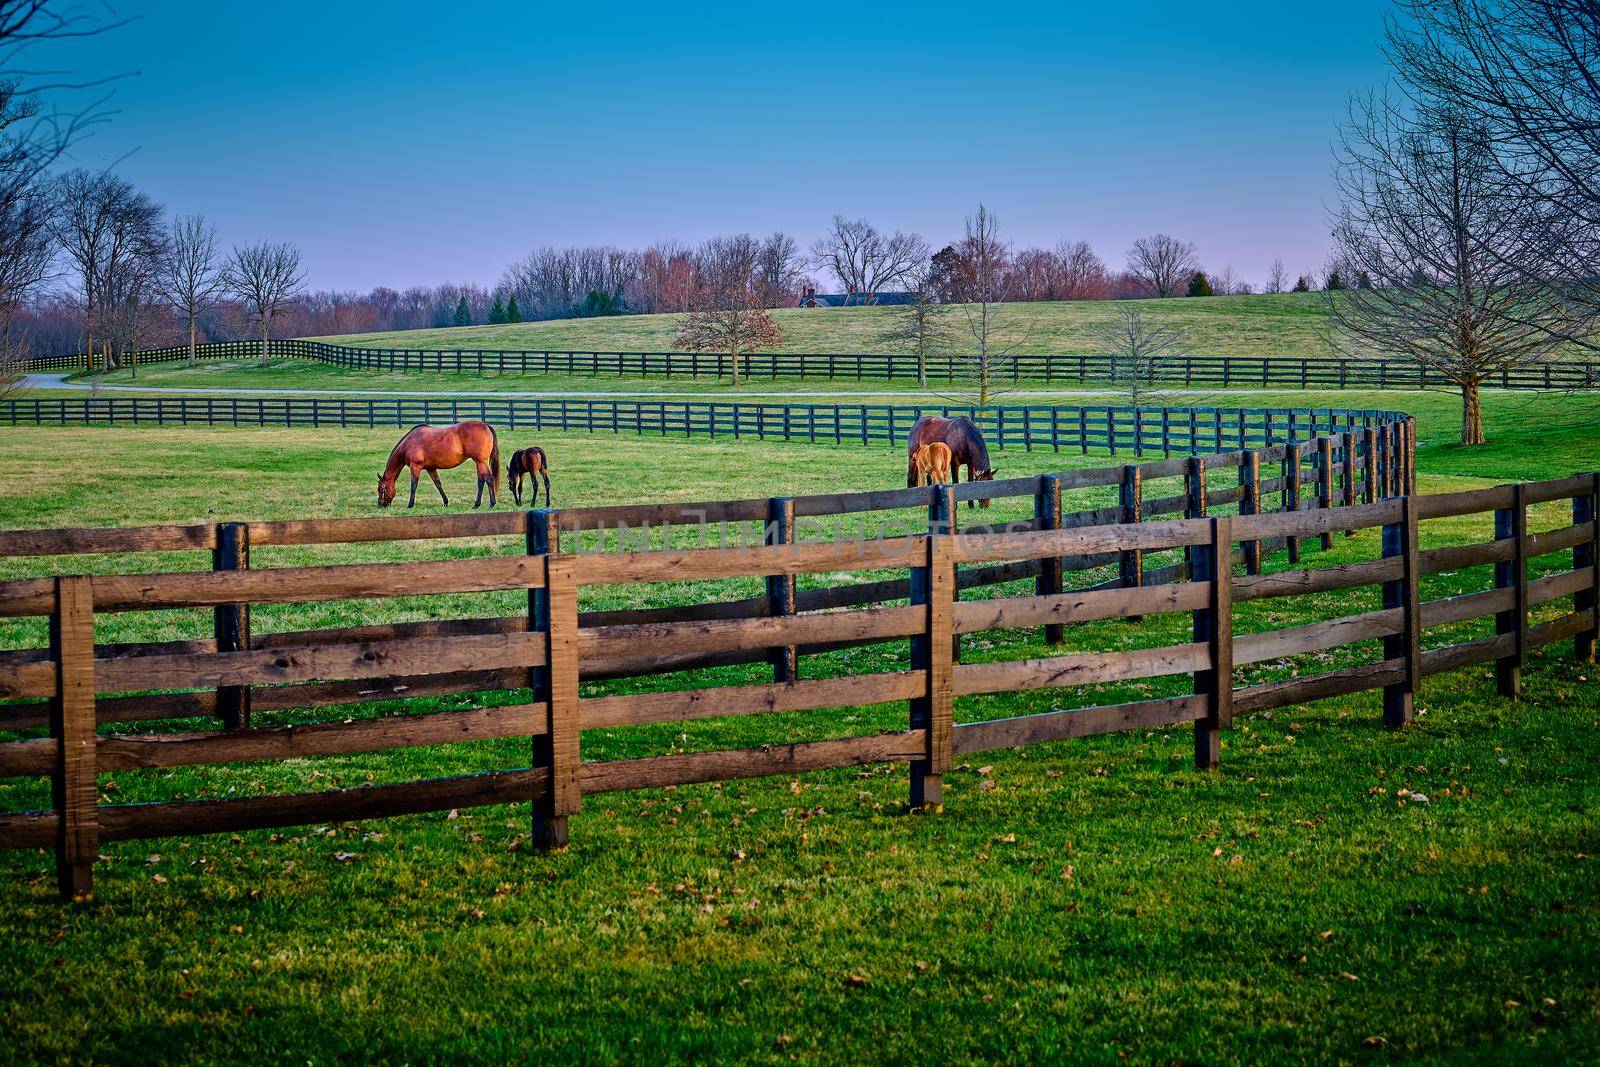 A pair of mares and foals grazing on early spring grass at a thoroughbred farm. by patrickstock